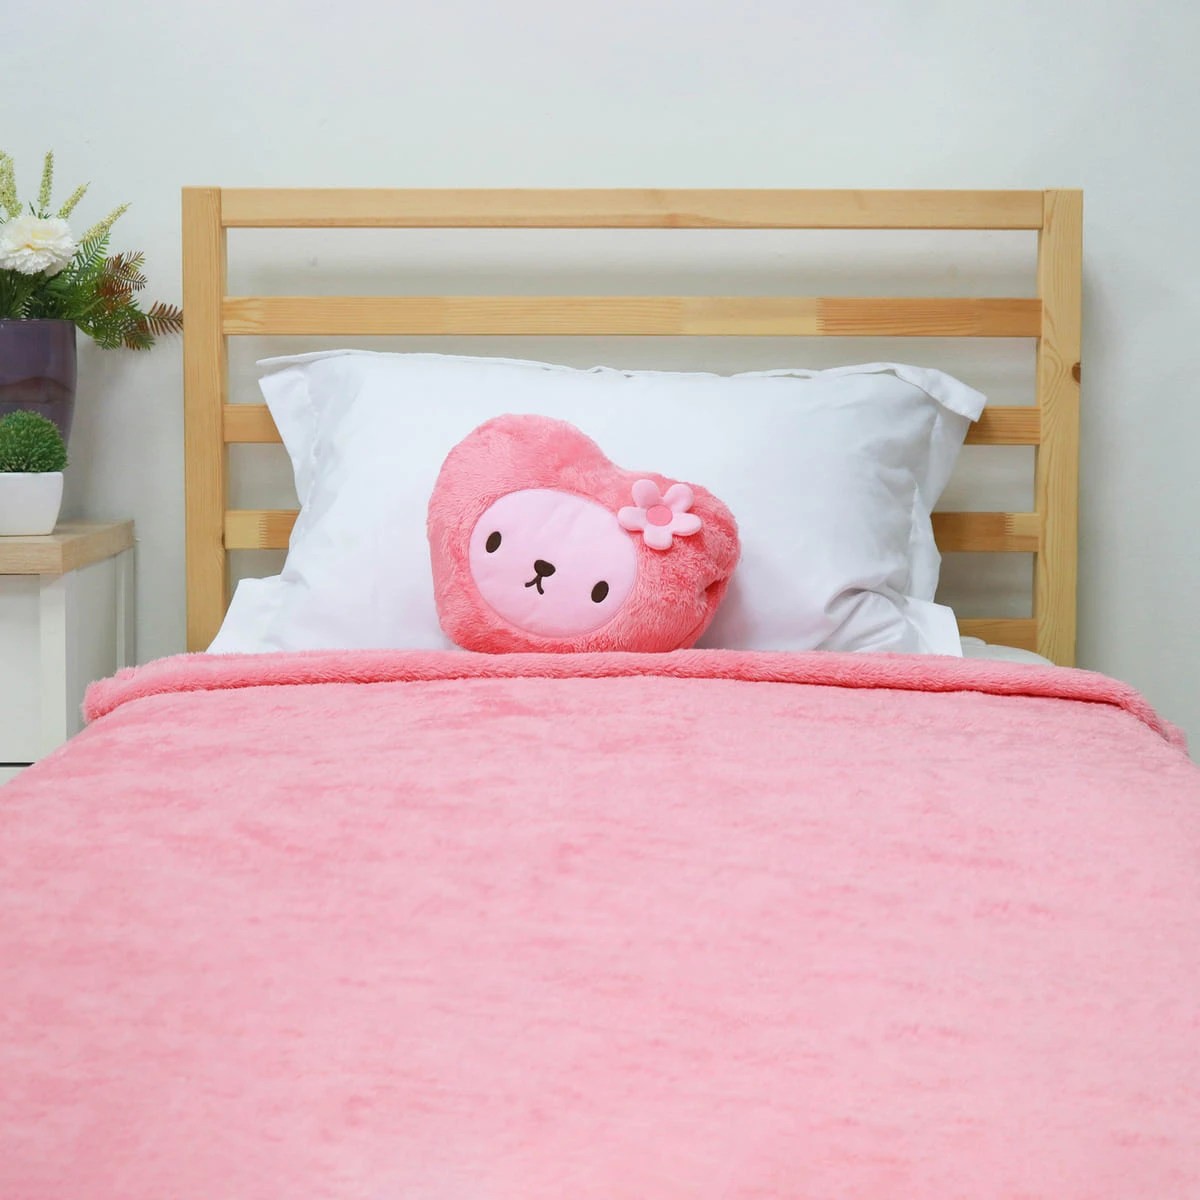 Fashion Hometex: Blanket Supplier  Lily 3D Embroidery Heart Shape Plush  Pillow Blanket (Pink)